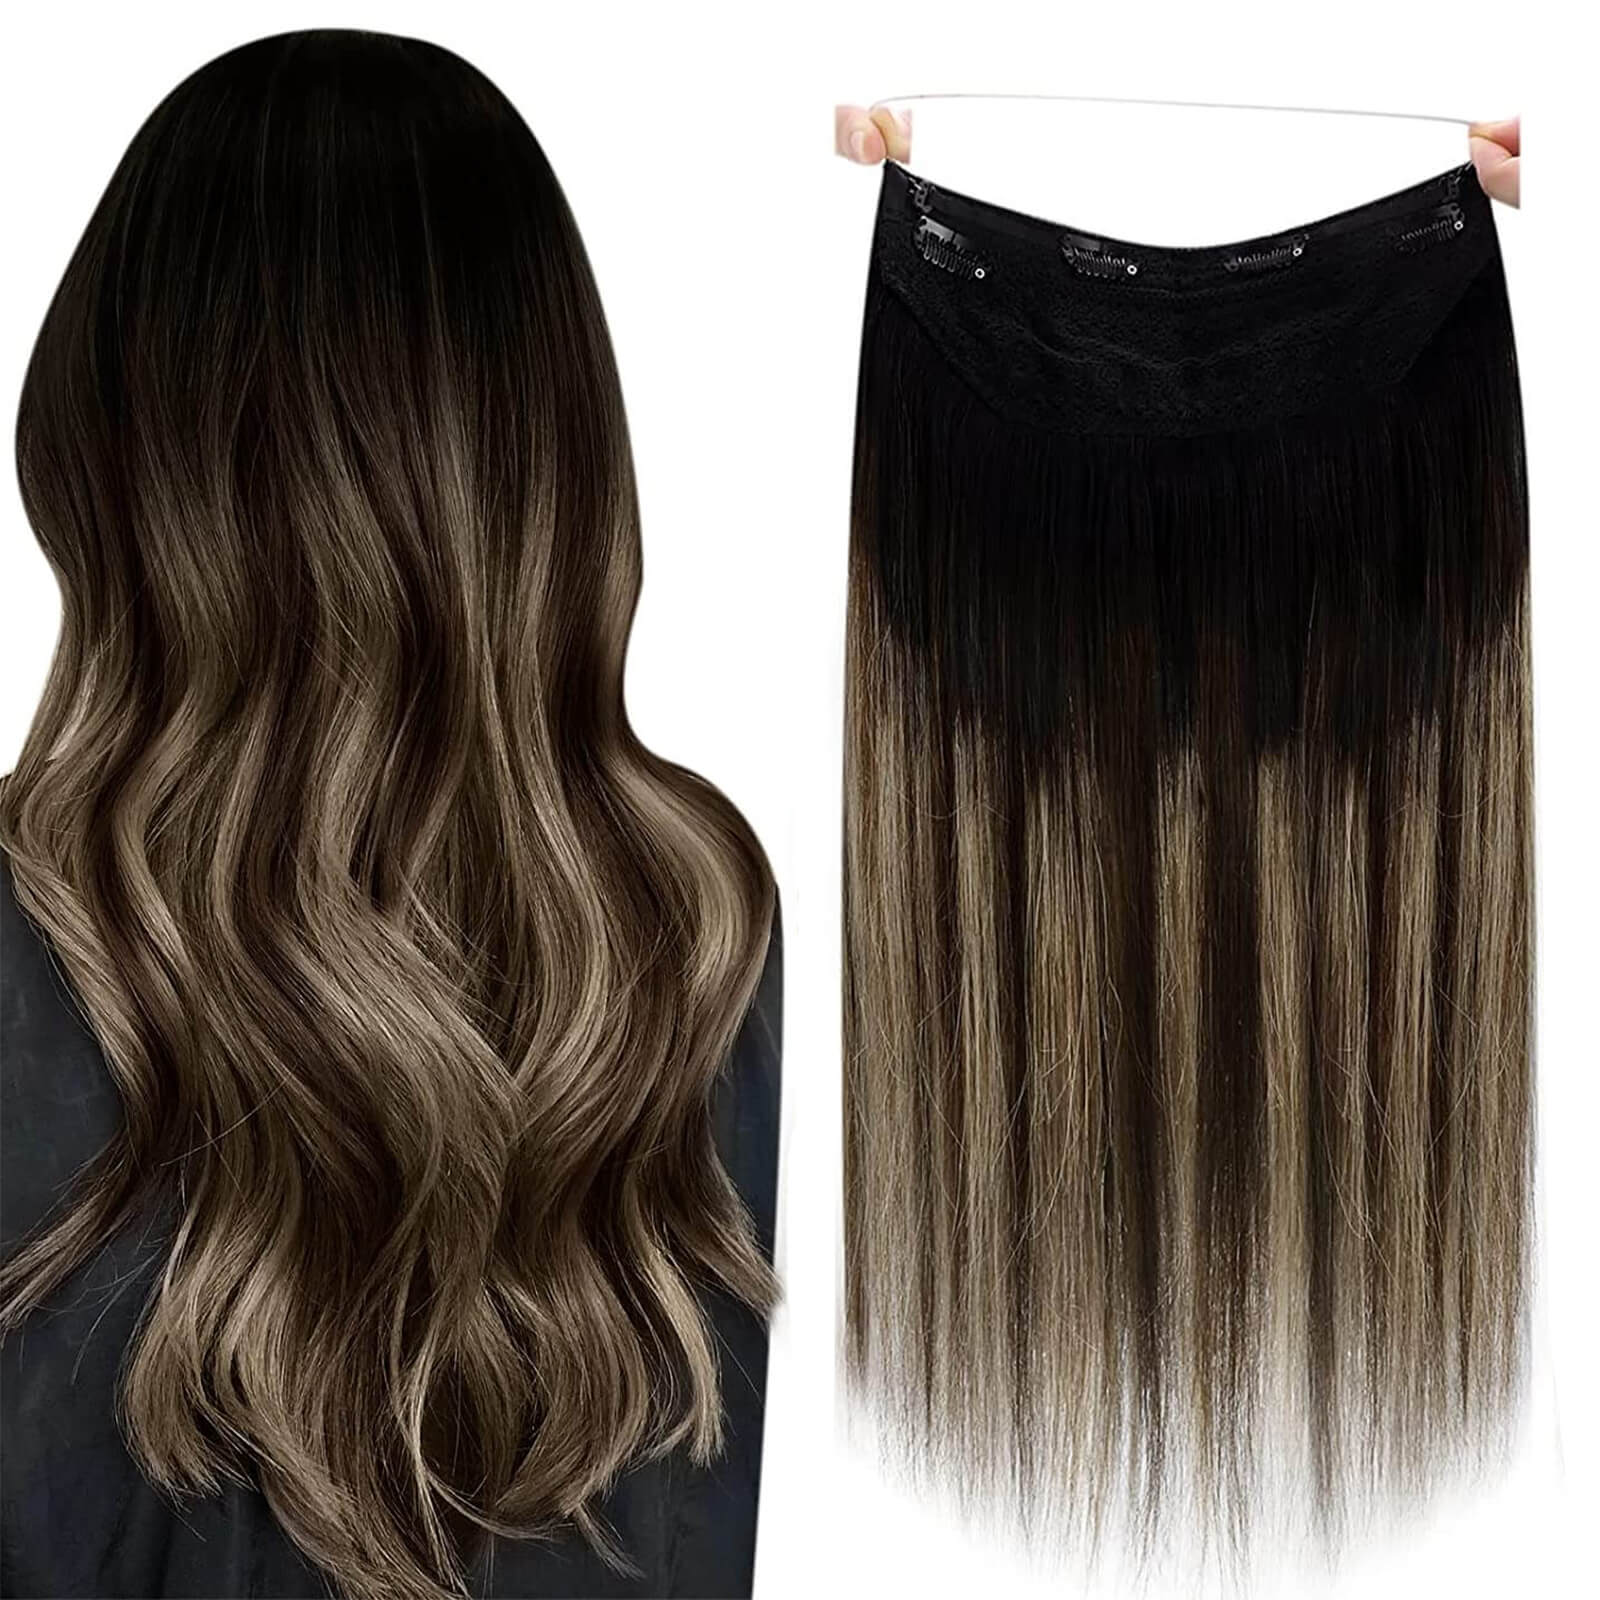 Halo Hair Extensions Balayage Black to Brown with Caramel Blonde Hair